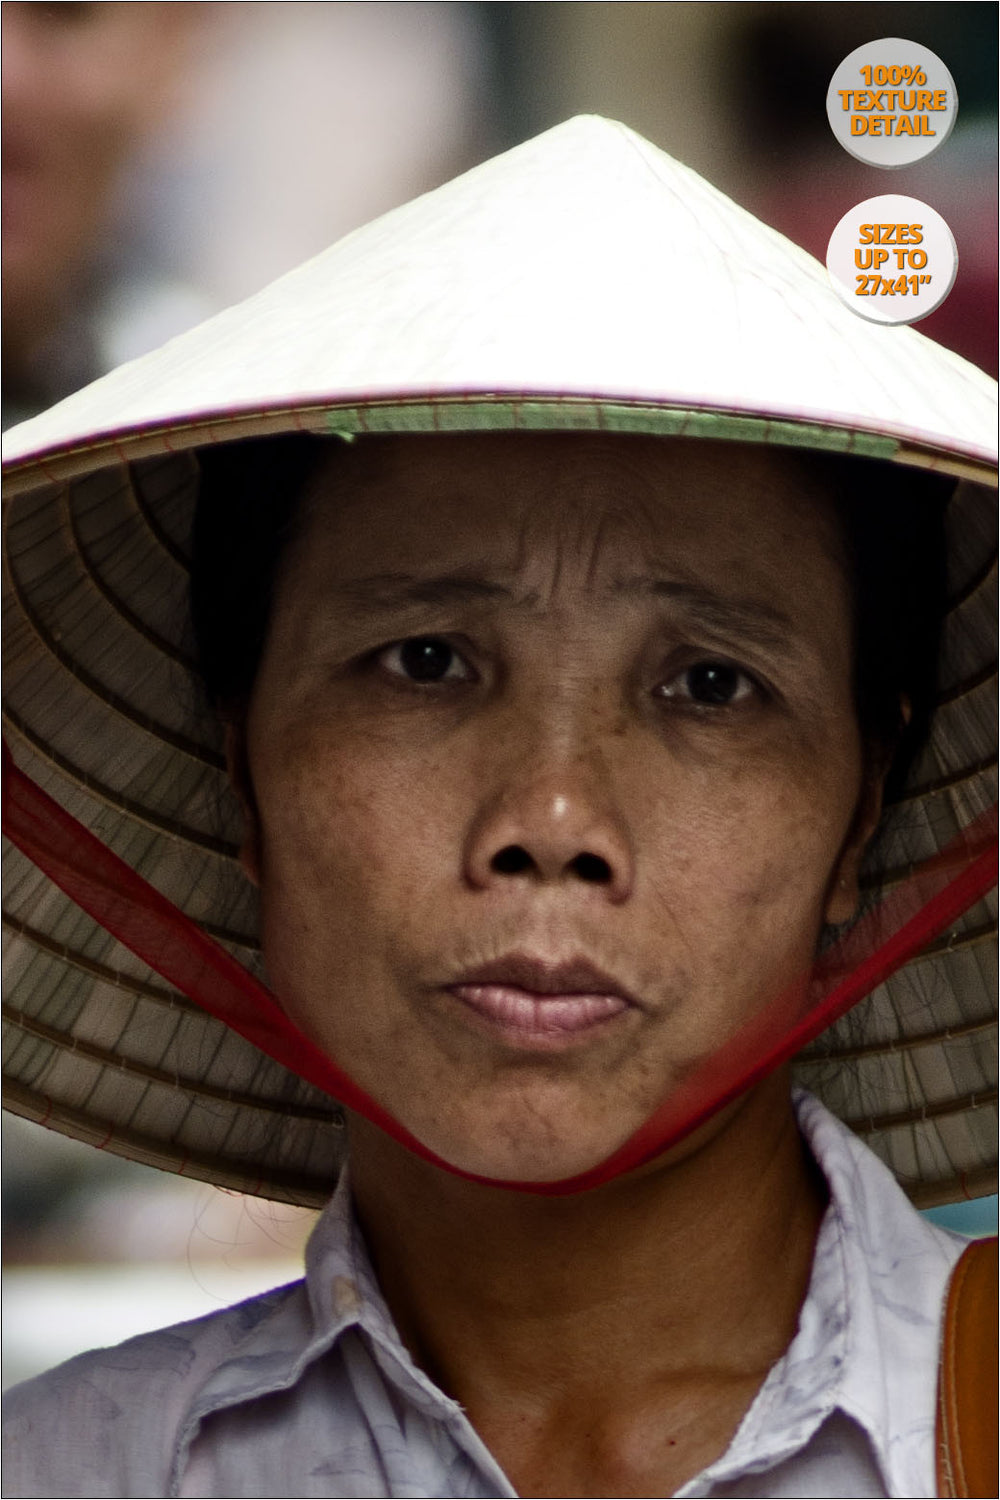 Woman selling hats in Hanoi old quarters. | 100% Magnification Detail View of the Print.